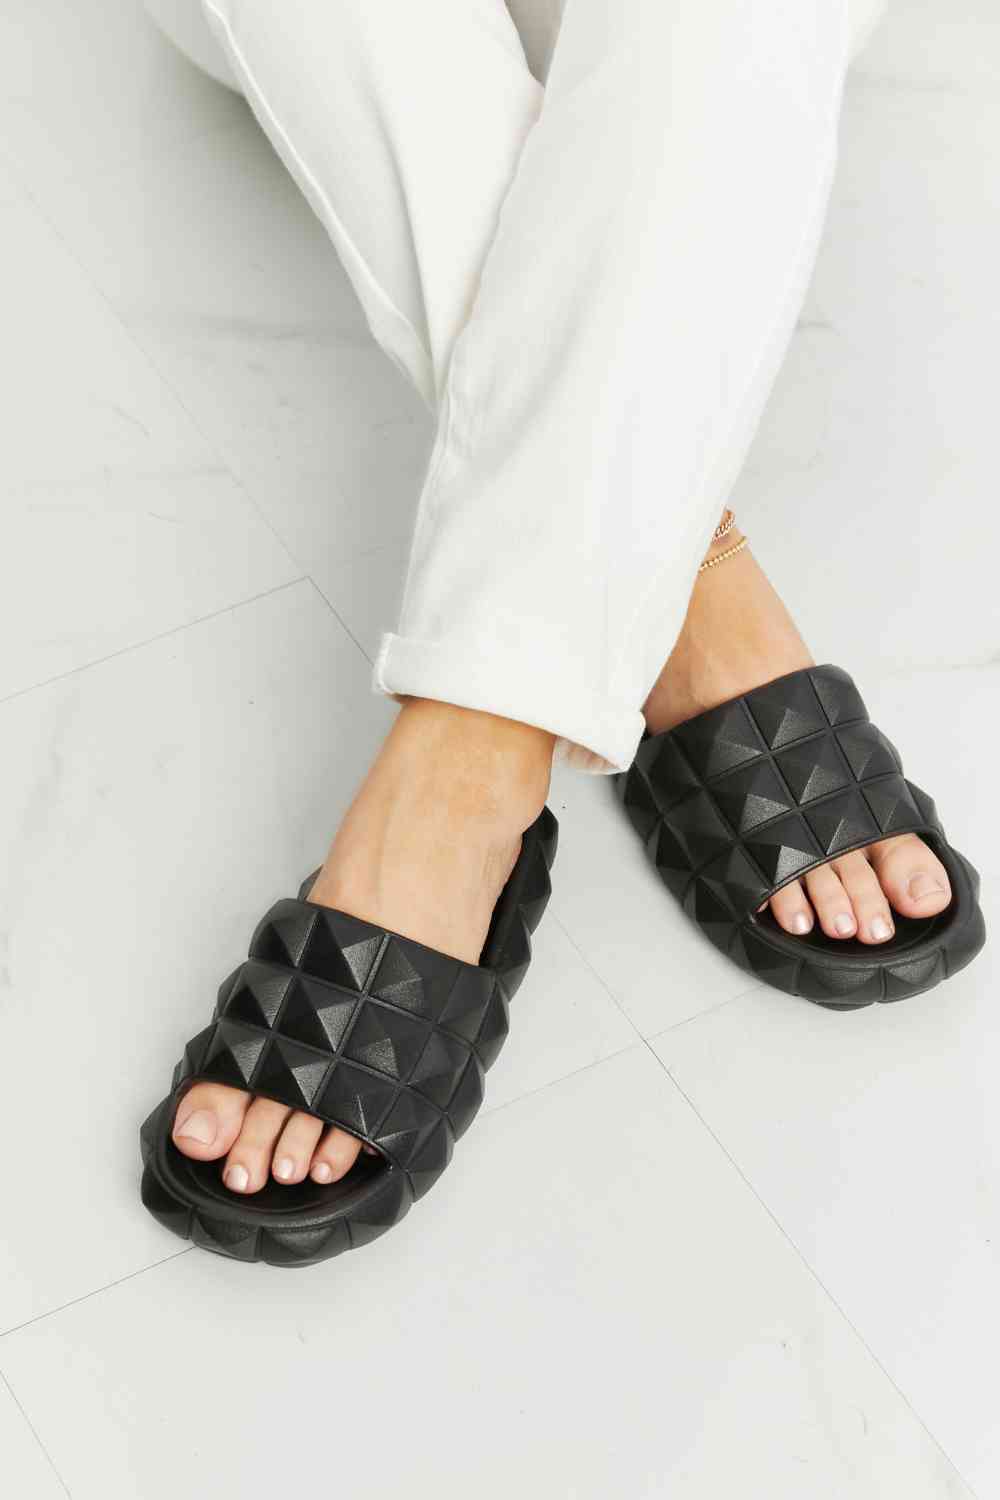 Chill in Style with Legend 3D Stud Slide Sandal